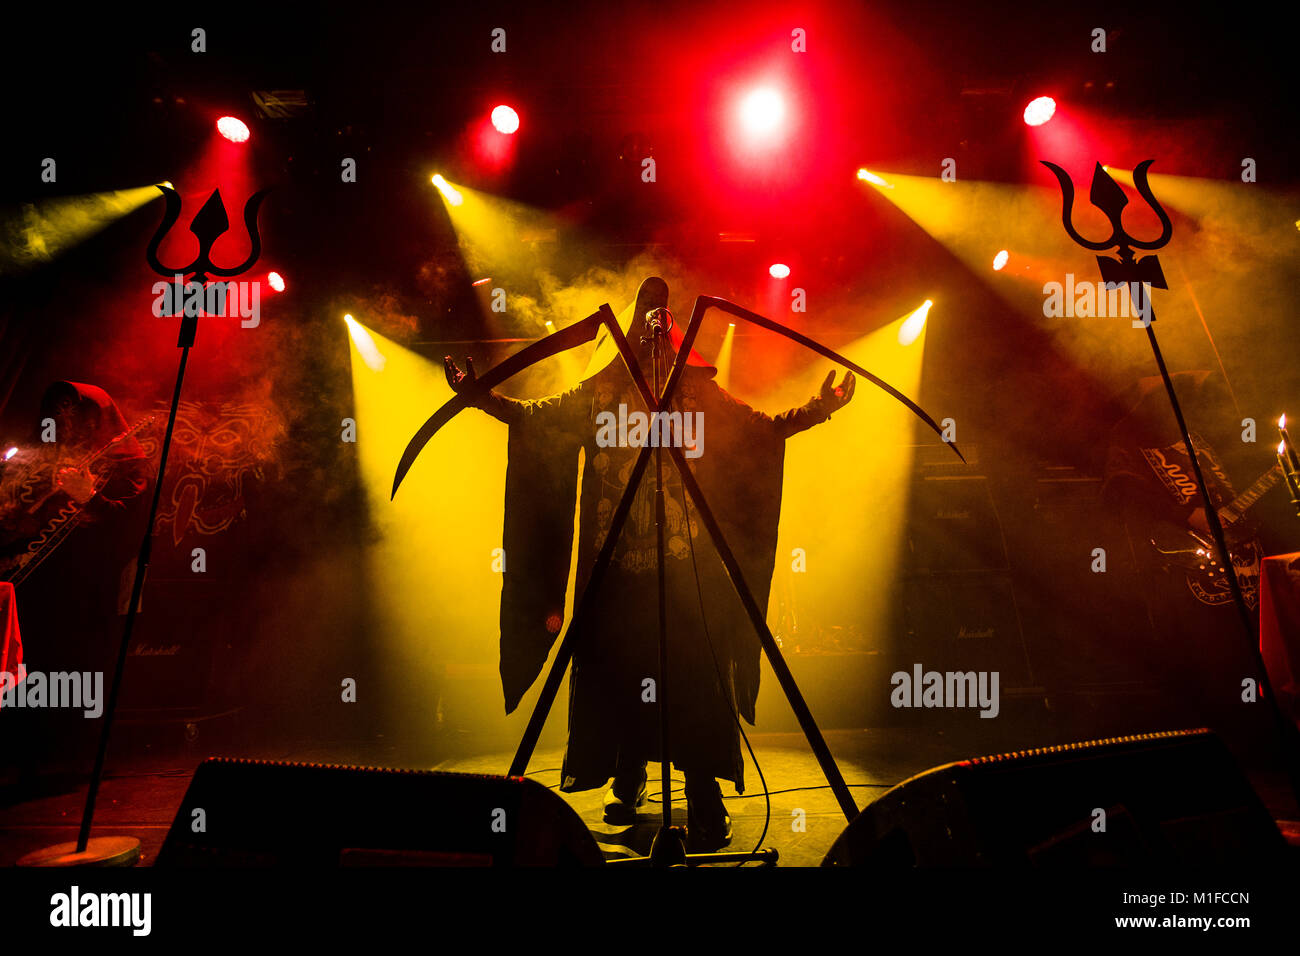 Norway, Bergen - August 24, 2017. The Czech black metal band Cult of Fire performs a live concert at the Norwegian metal festival Beyond the Gates 2017 in Bergen. Here vocalist Devilish is seen live on stage. (Photo credit: Gonzales Photo / Jarle H. Moe). Stock Photo